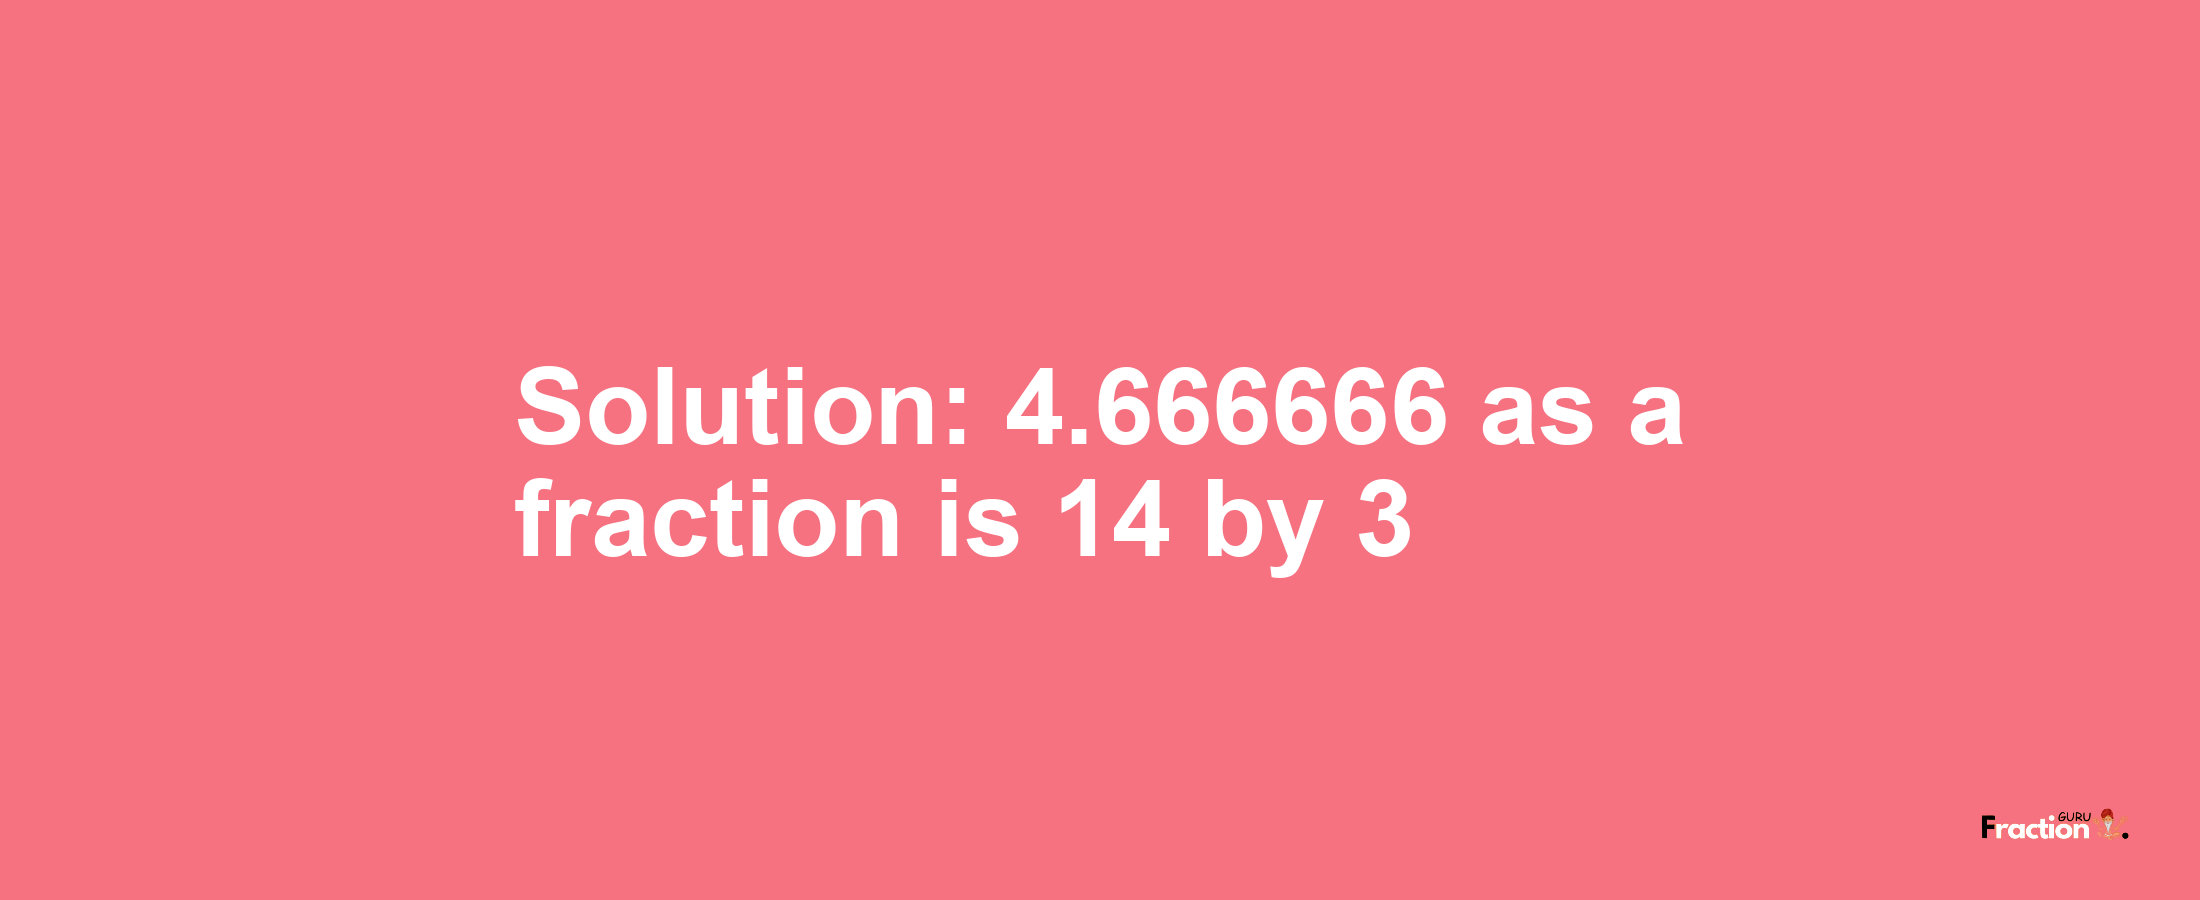 Solution:4.666666 as a fraction is 14/3